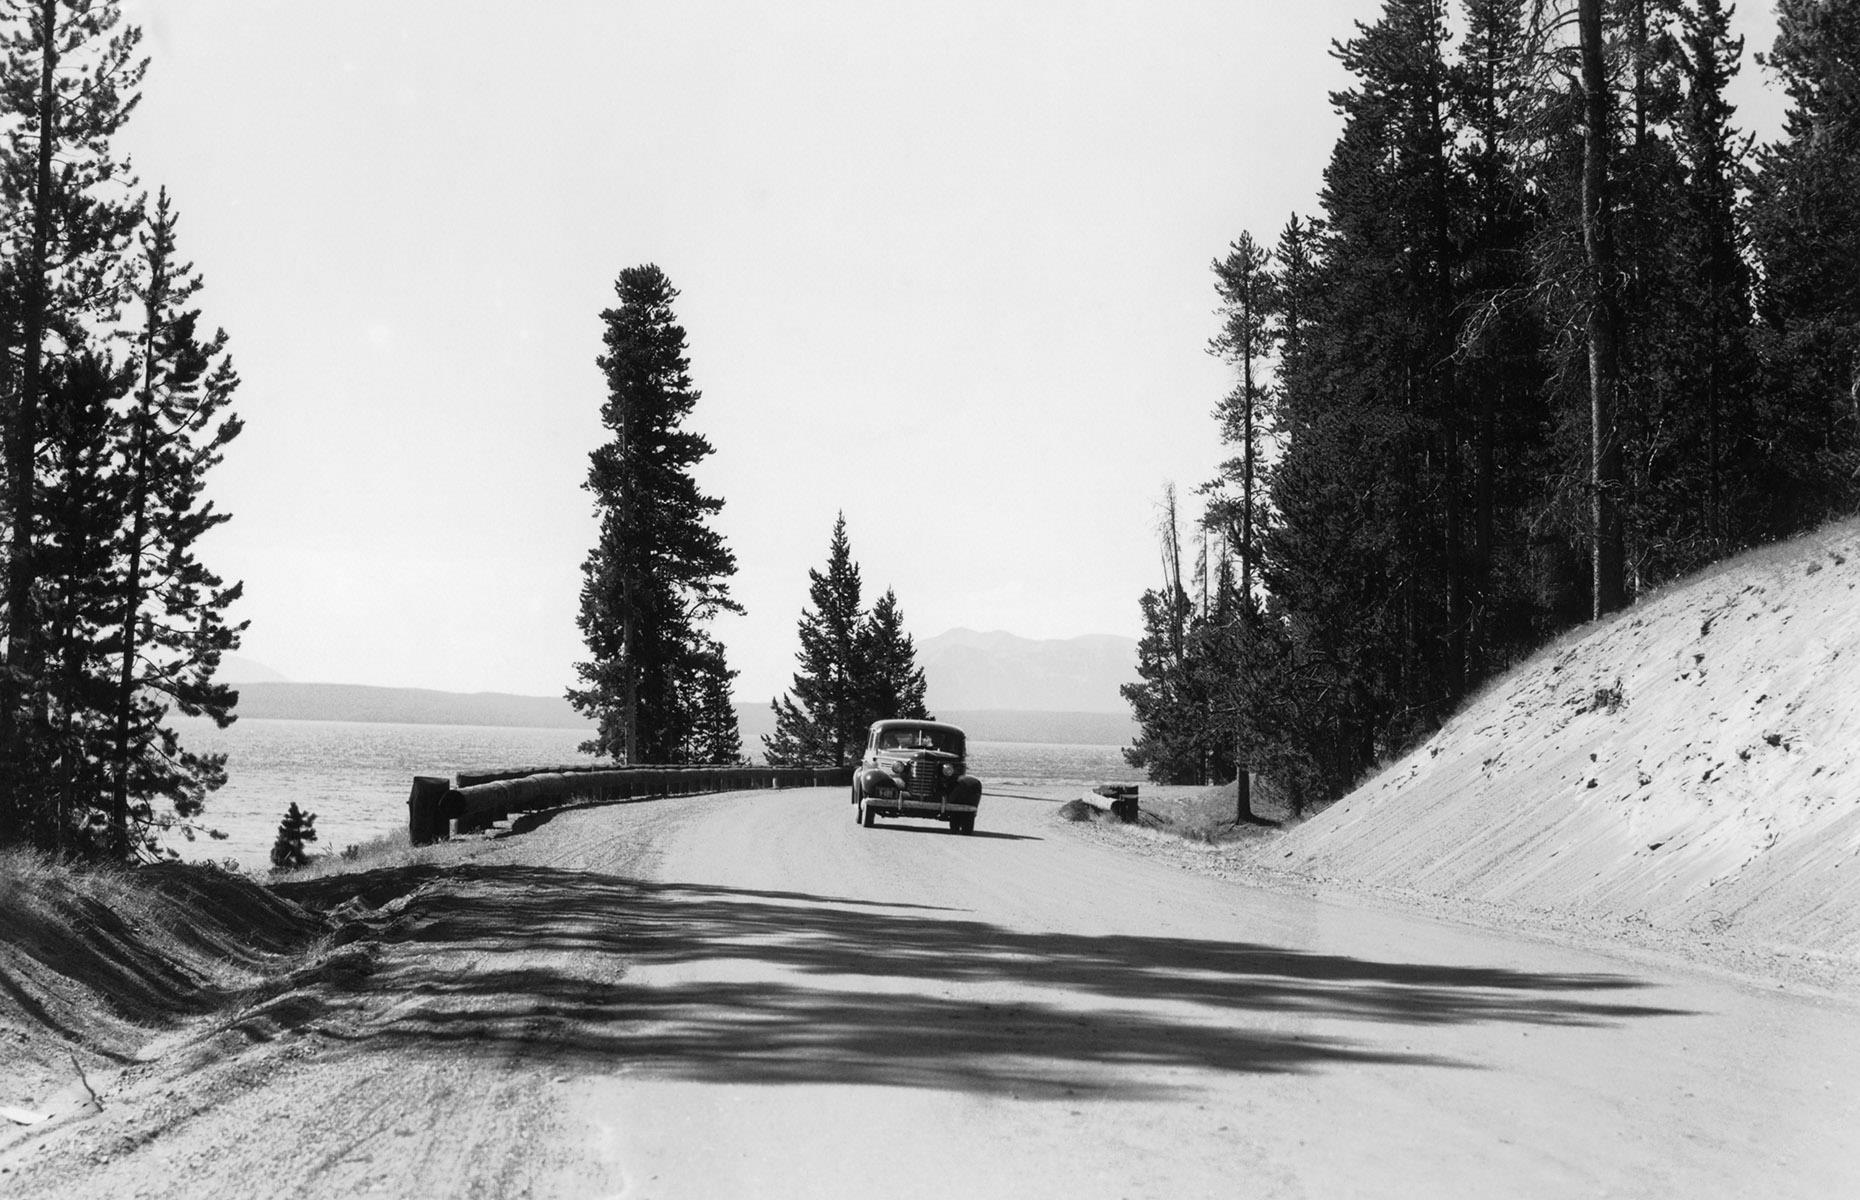 The Second World War took its toll on Yellowstone. Visitor numbers plummeted, improvement works and infrastructure projects stopped in their tracks and resources dwindled as they were pumped into the war effort. Happily, though, the park was still able to serve its main purpose: to protect those precious natural wonders for posterity.